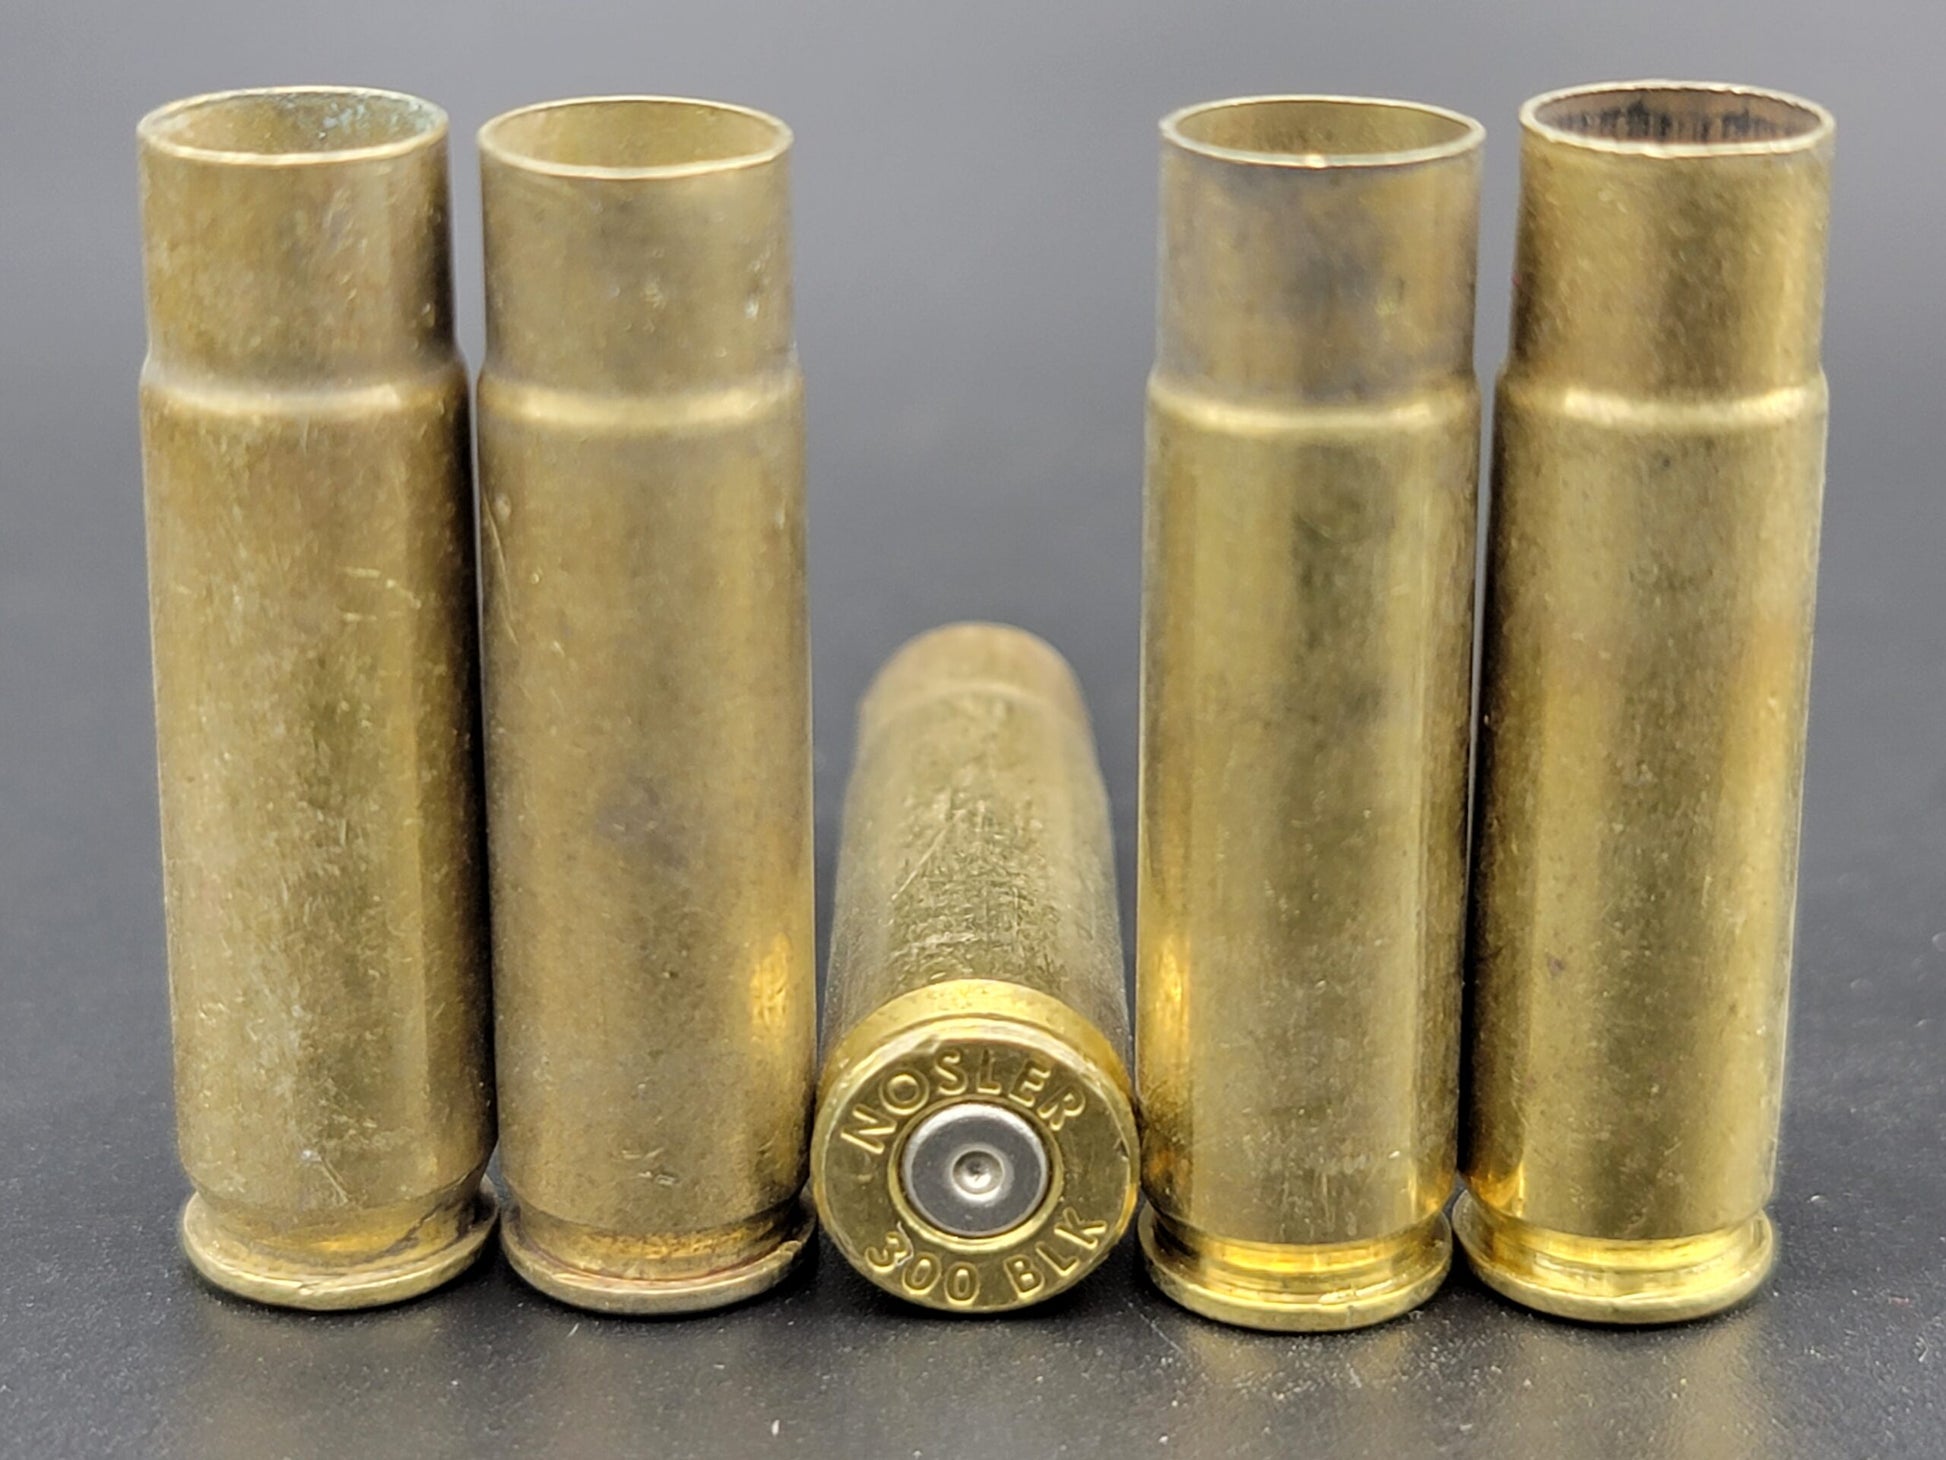 300 Blackout once fired rifle brass. Hand sorted from reputable indoor/military ranges for reloading. Reliable spent casings for precision shooting.